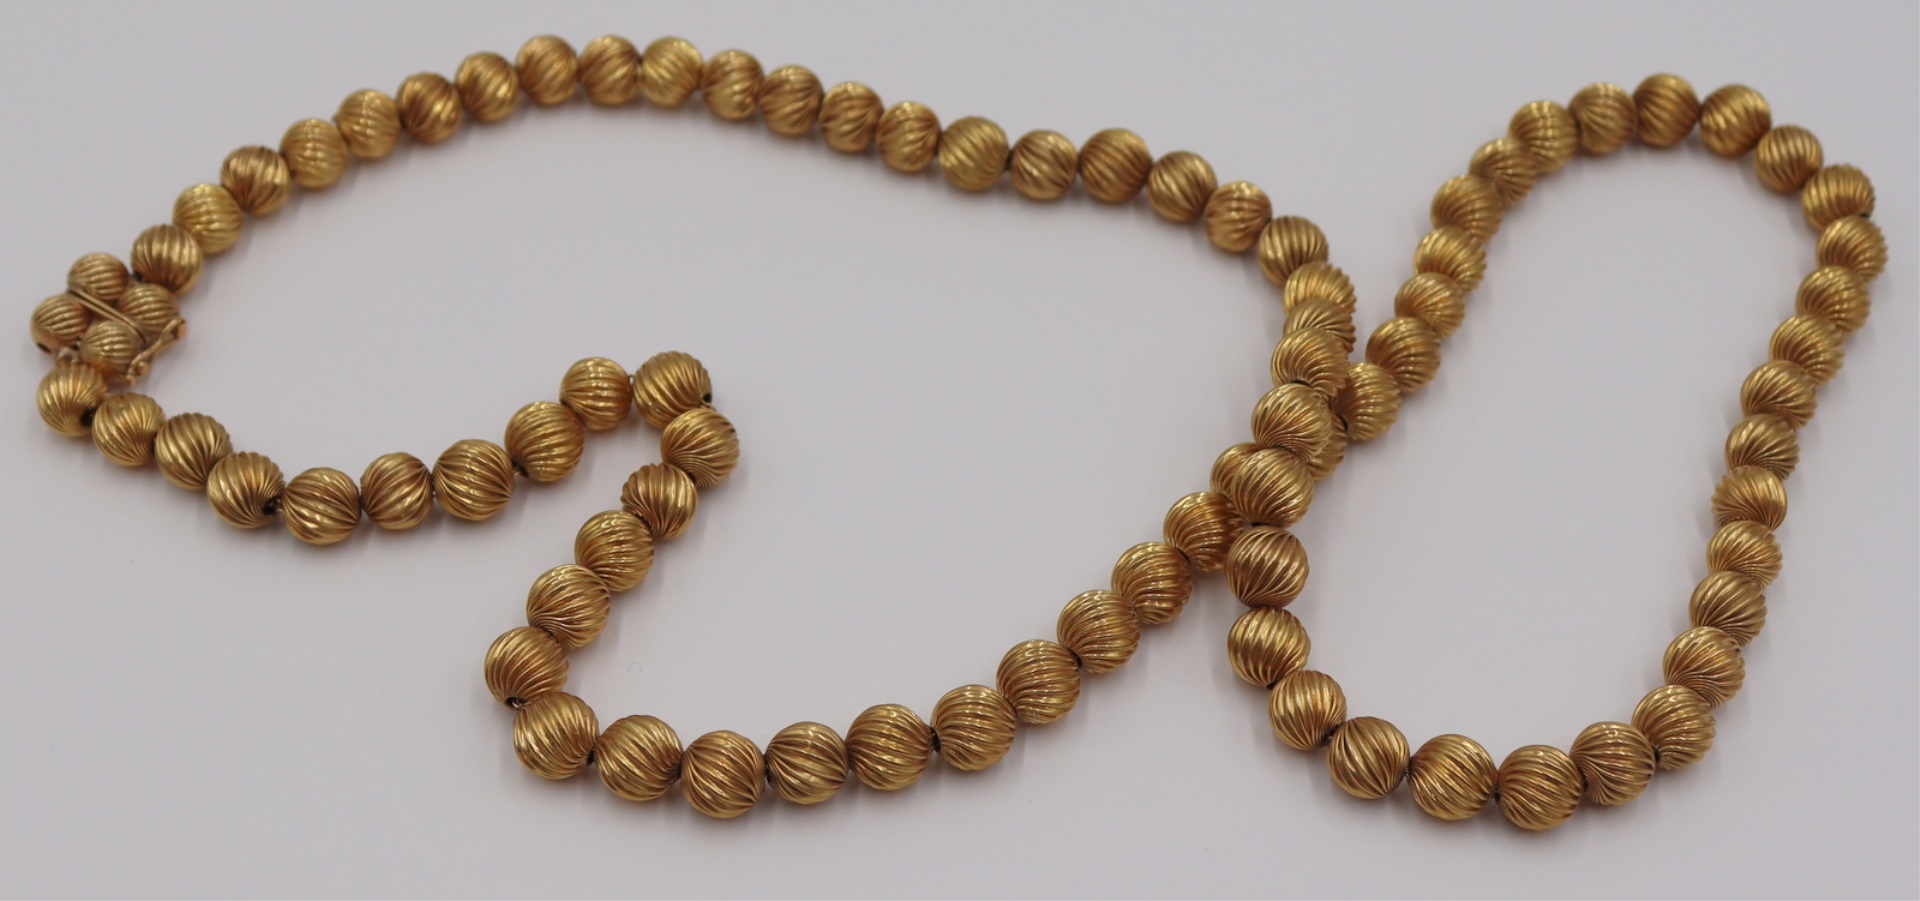 JEWELRY. 14KT GOLD RIBBED BEADED